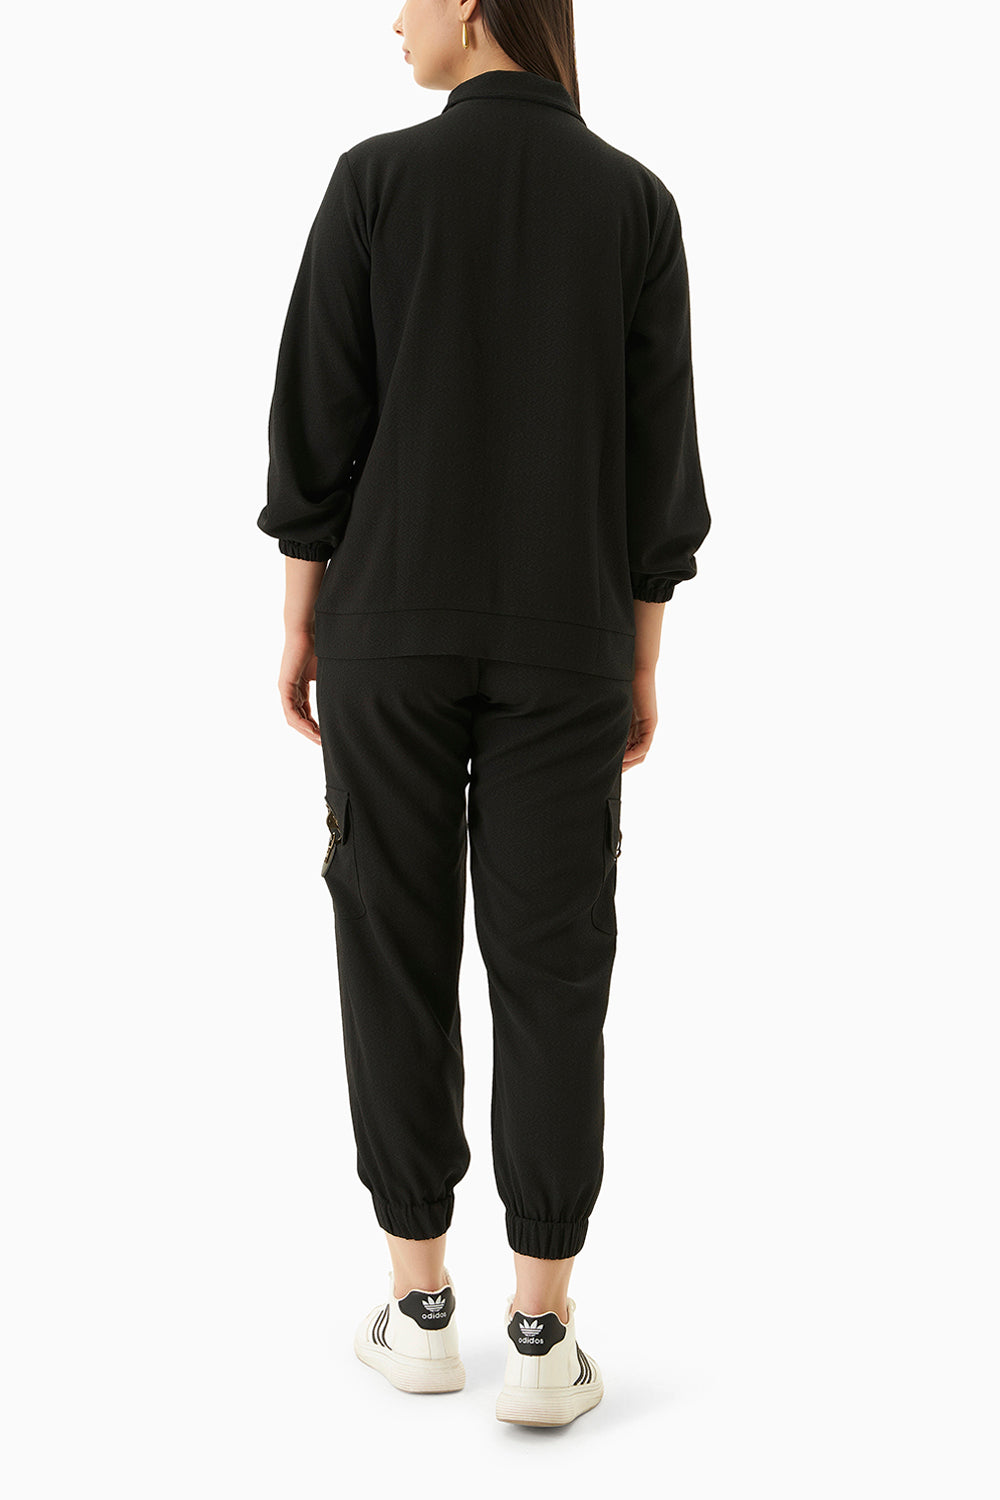 Black Tracksuit with Metal Buckles